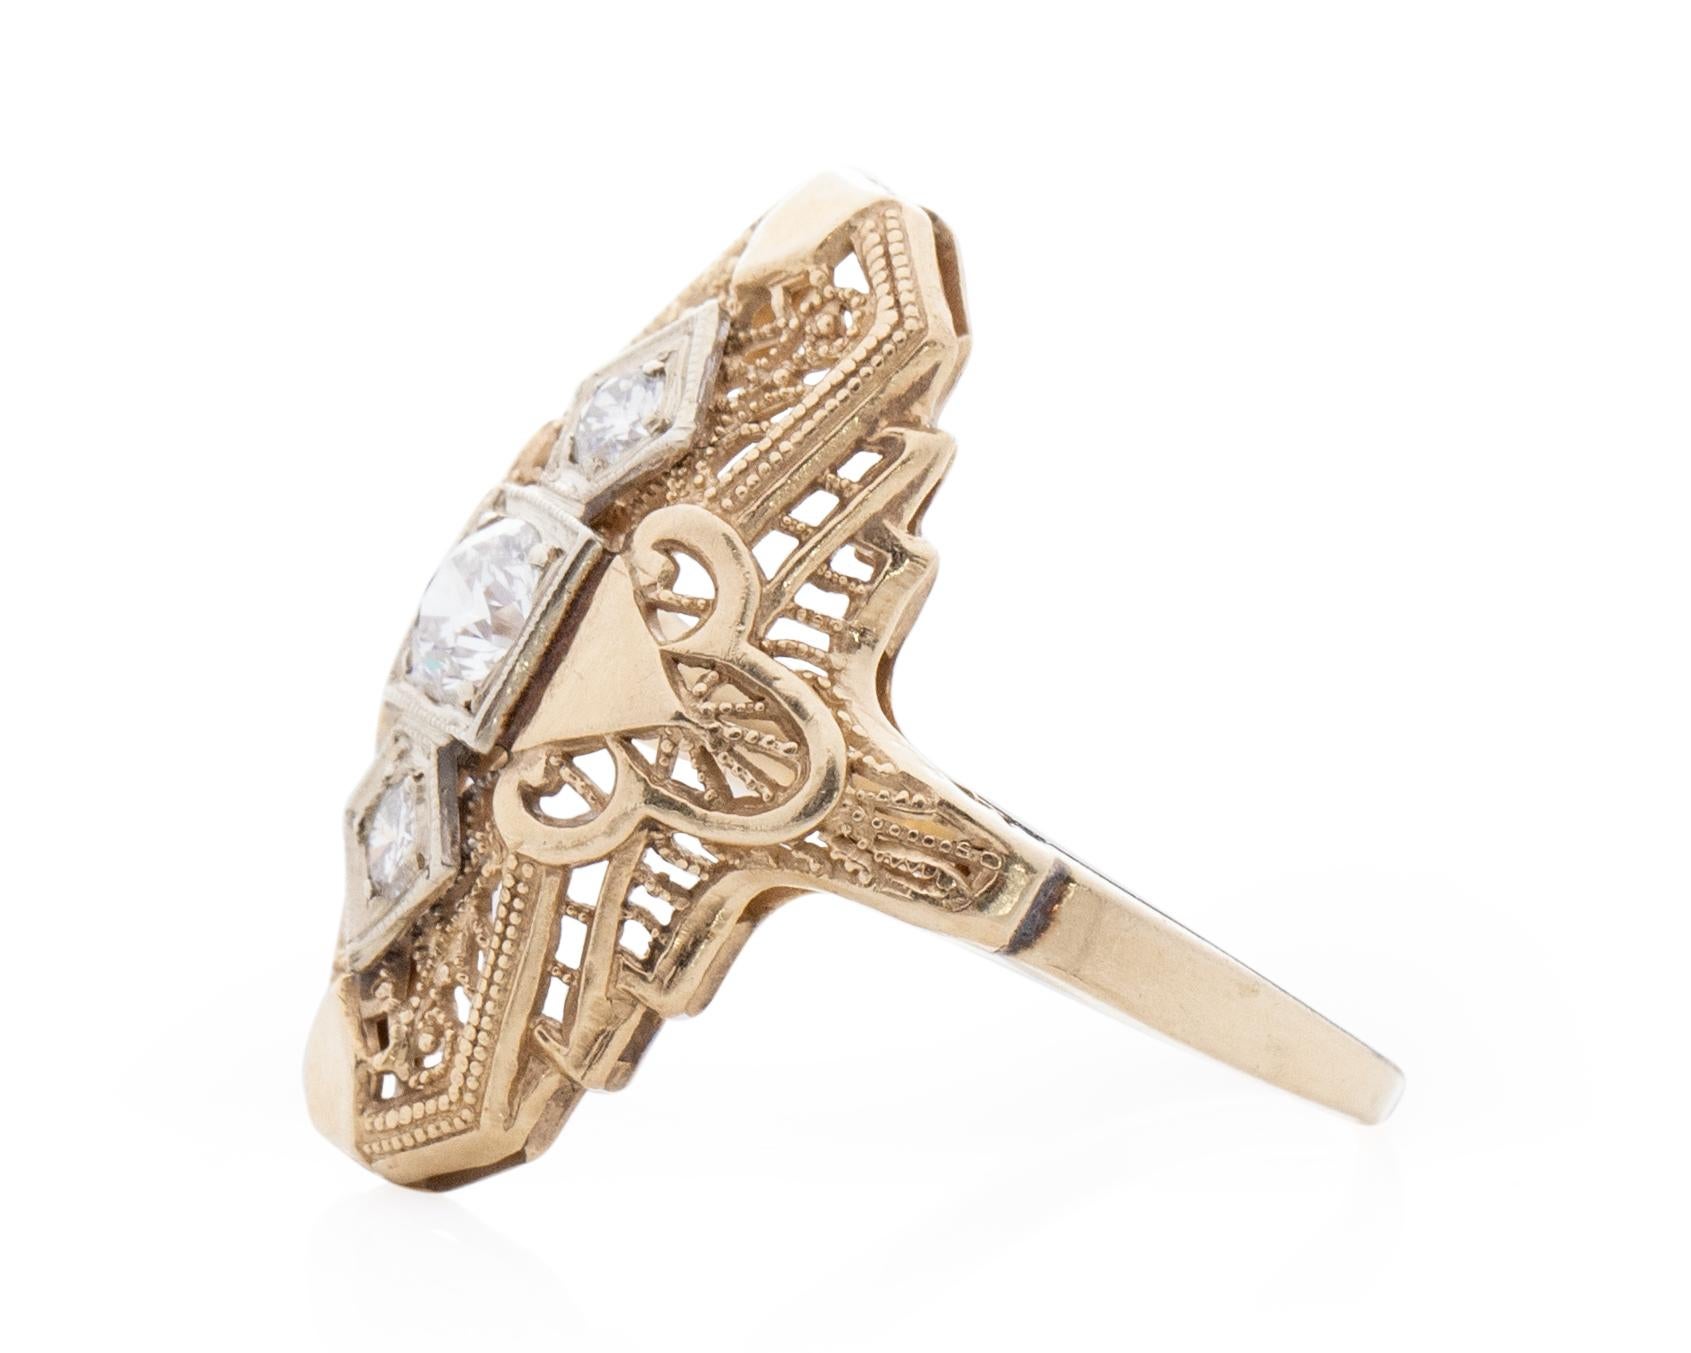 This lovely example of an Art Deco shield ring is crafted of 14K yellow gold. Intricate filigree designs surround 3 sparkling diamonds on this vintage beauty. This is a true vintage piece and would make a great addition to any vintage lovers